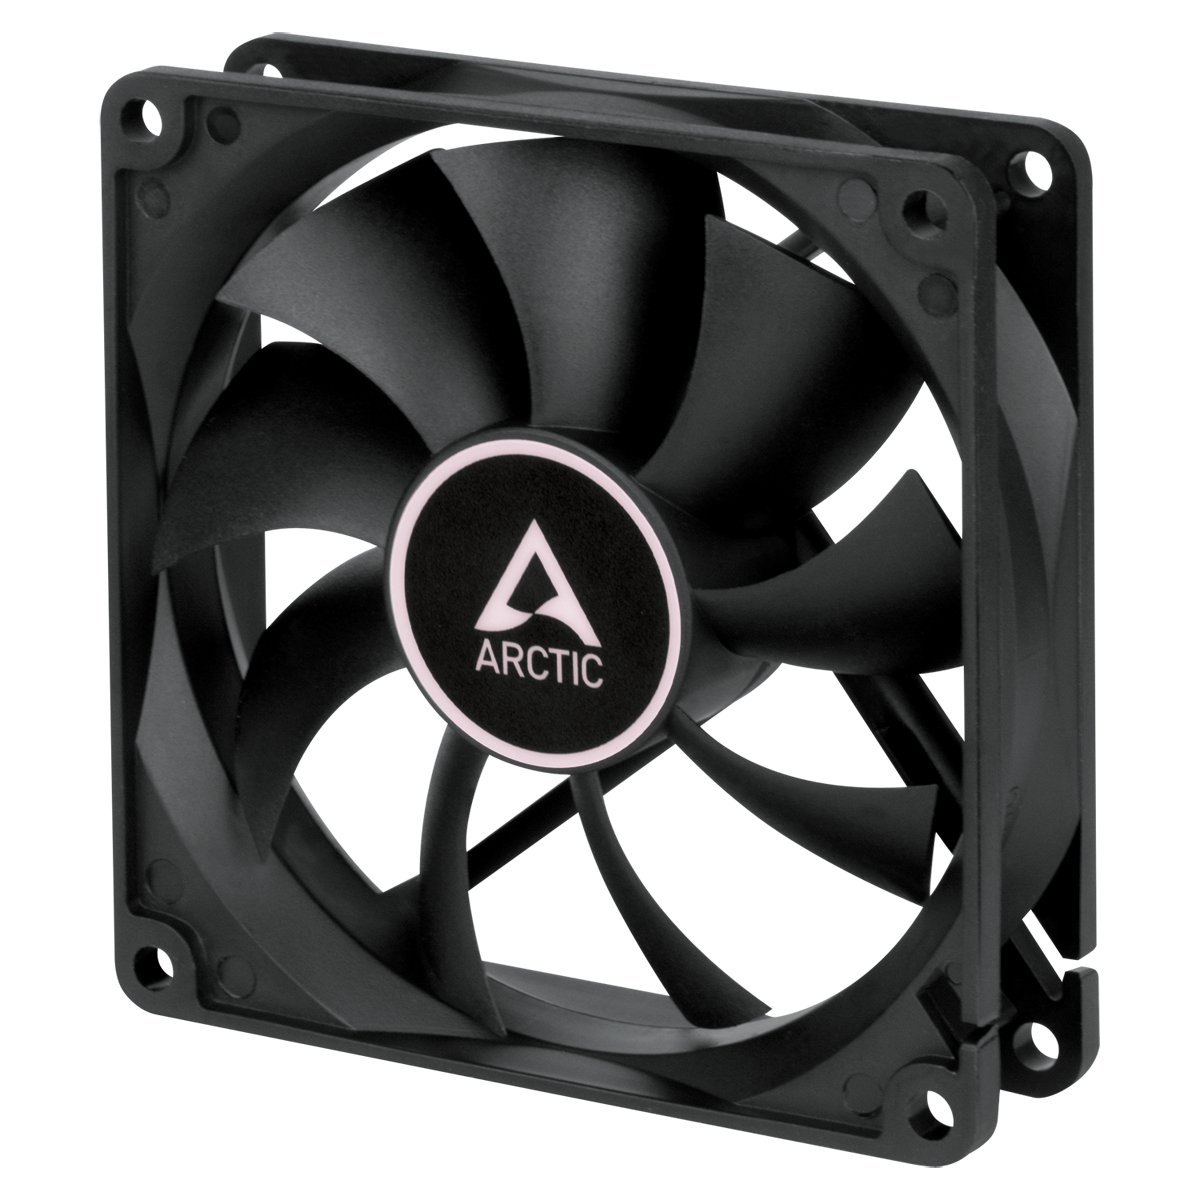 Arctic F9 PWM PST CO Case Fan - 92mm standard PWM case fan with double ball bearing technology - Arctic 2.35.64.00.094